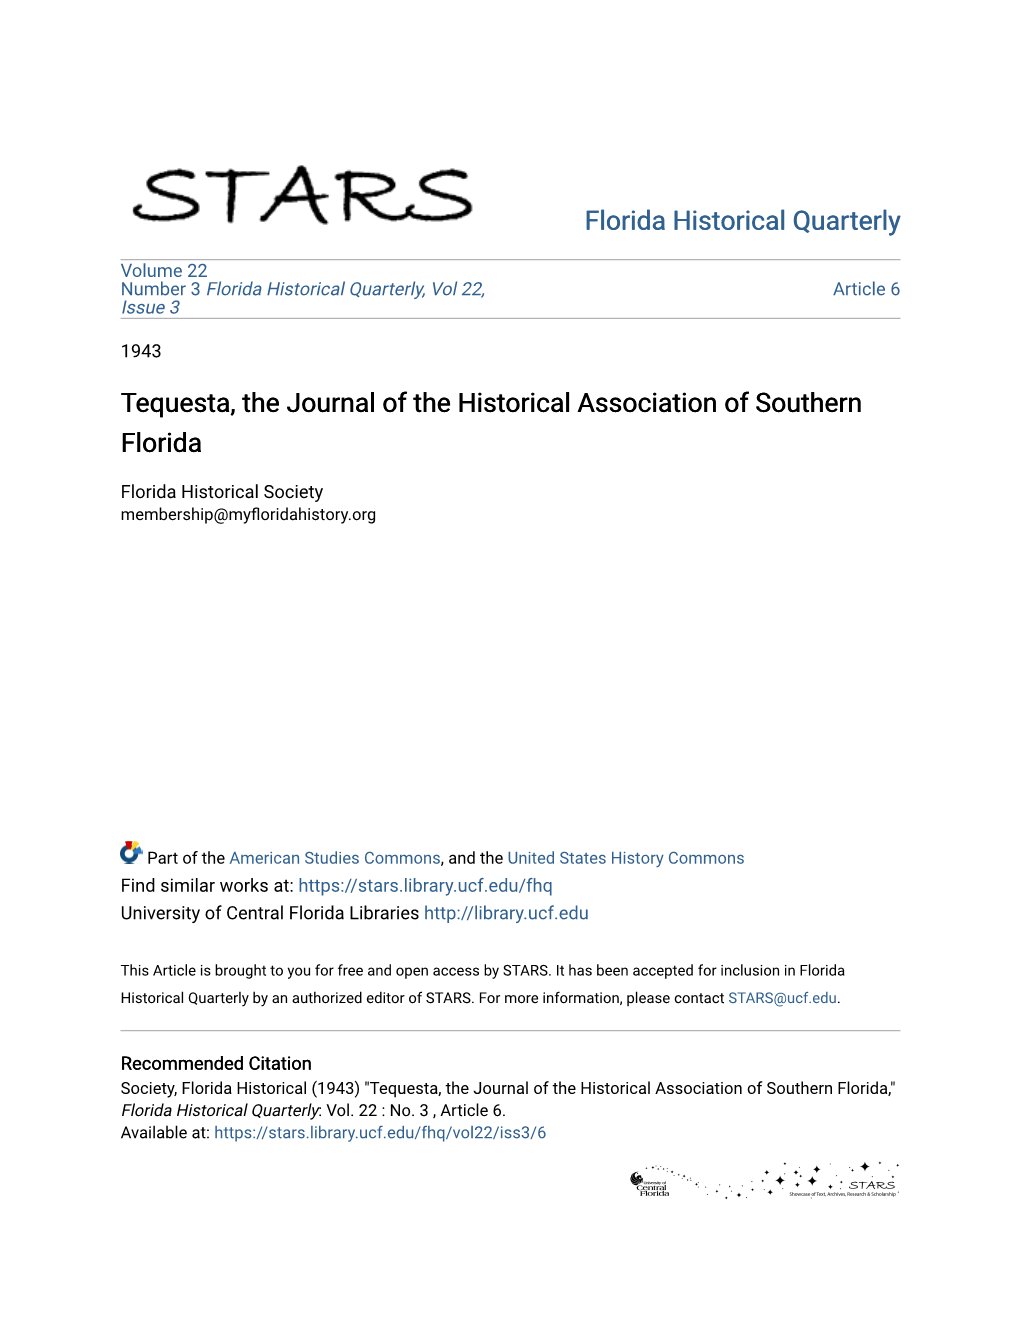 Tequesta, the Journal of the Historical Association of Southern Florida